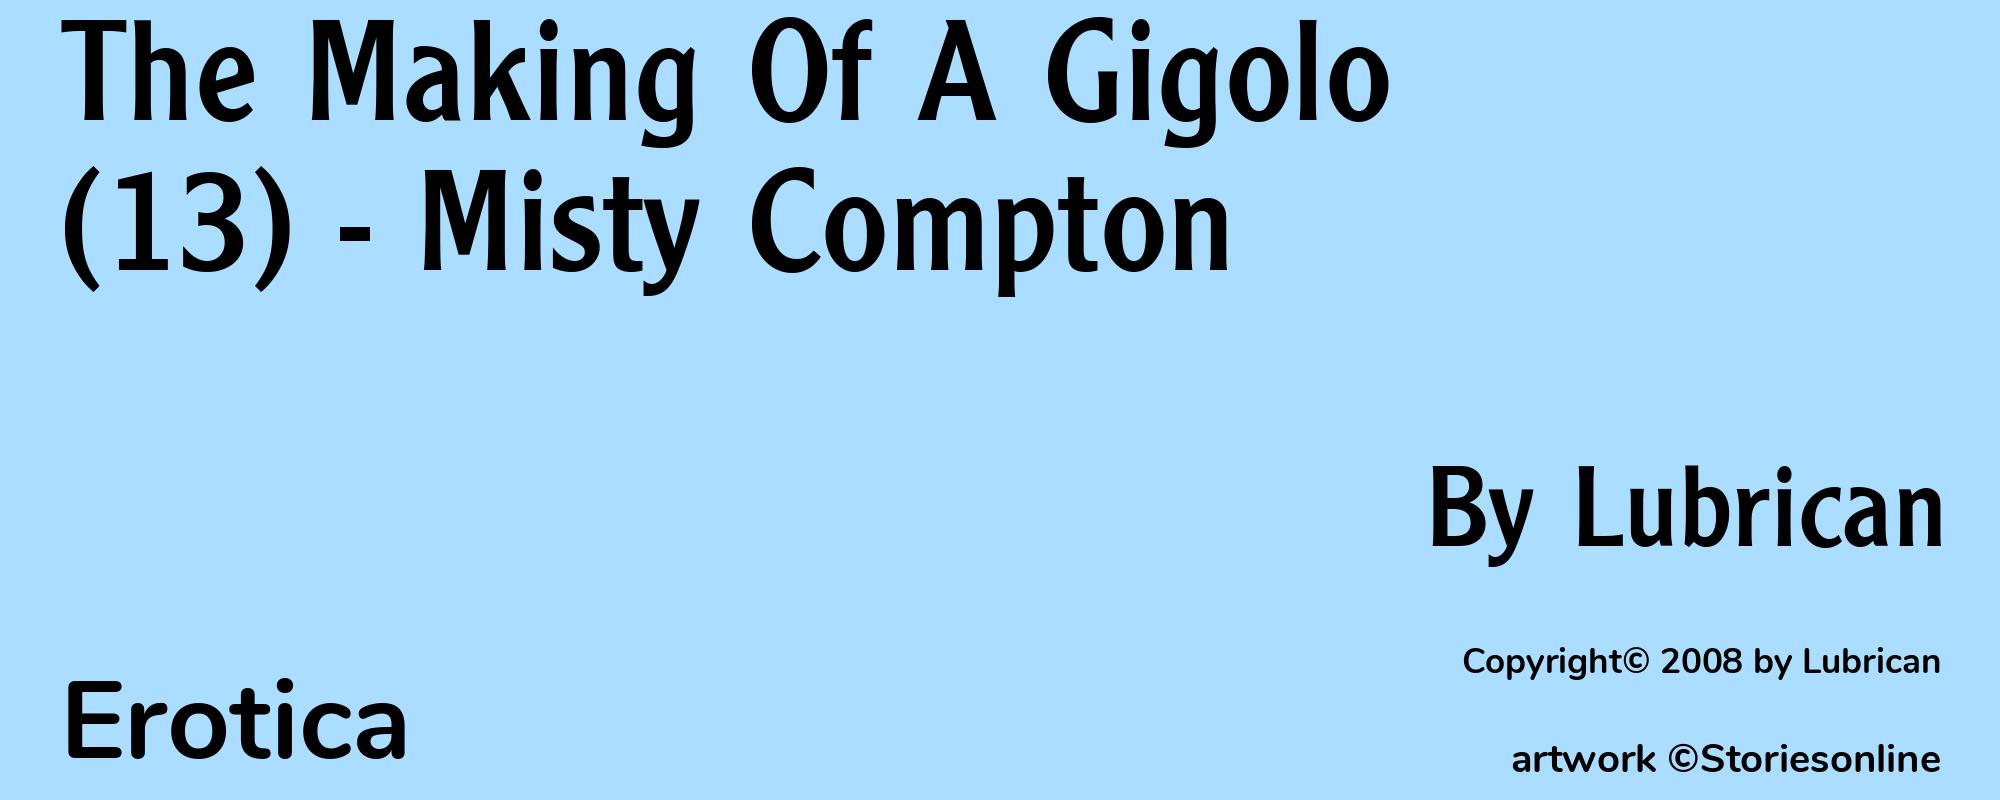 The Making Of A Gigolo (13) - Misty Compton - Cover